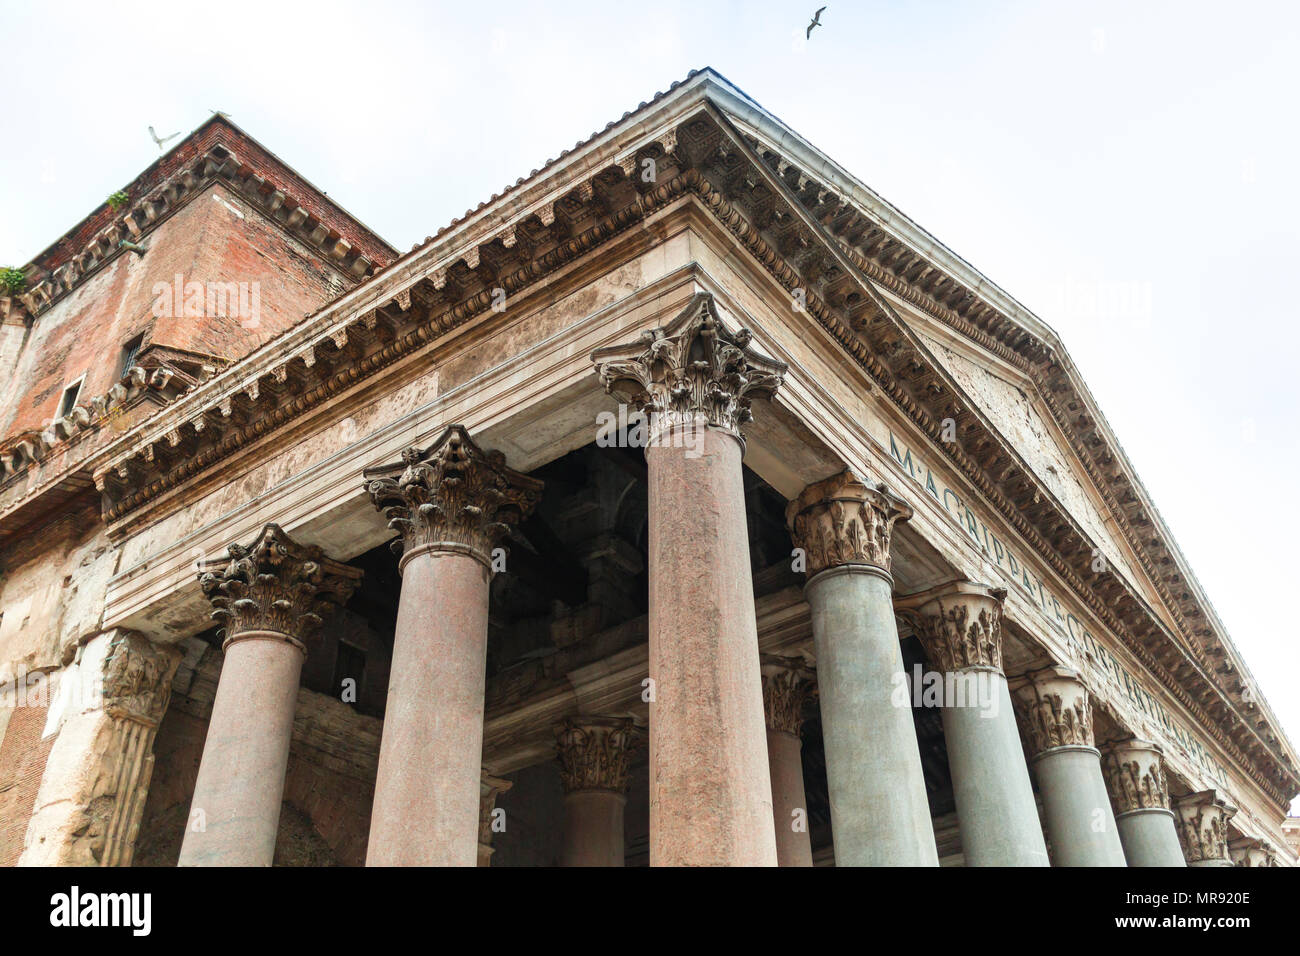 Portico of the Pantheon building with Corinthian columns Stock Photo